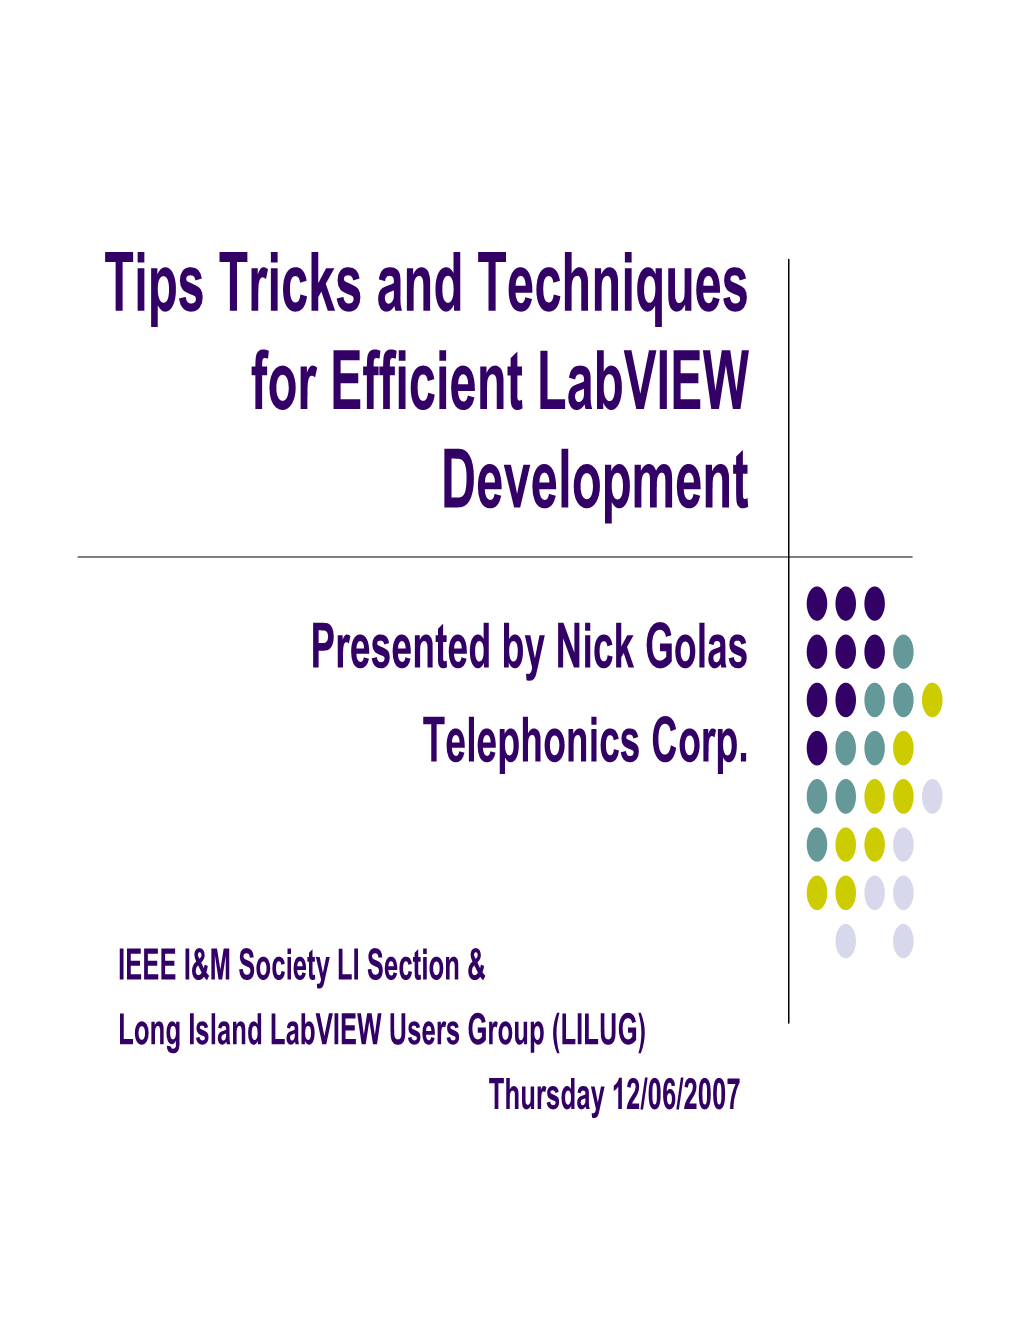 Tips Tricks and Techniques for Efficient Labview Development